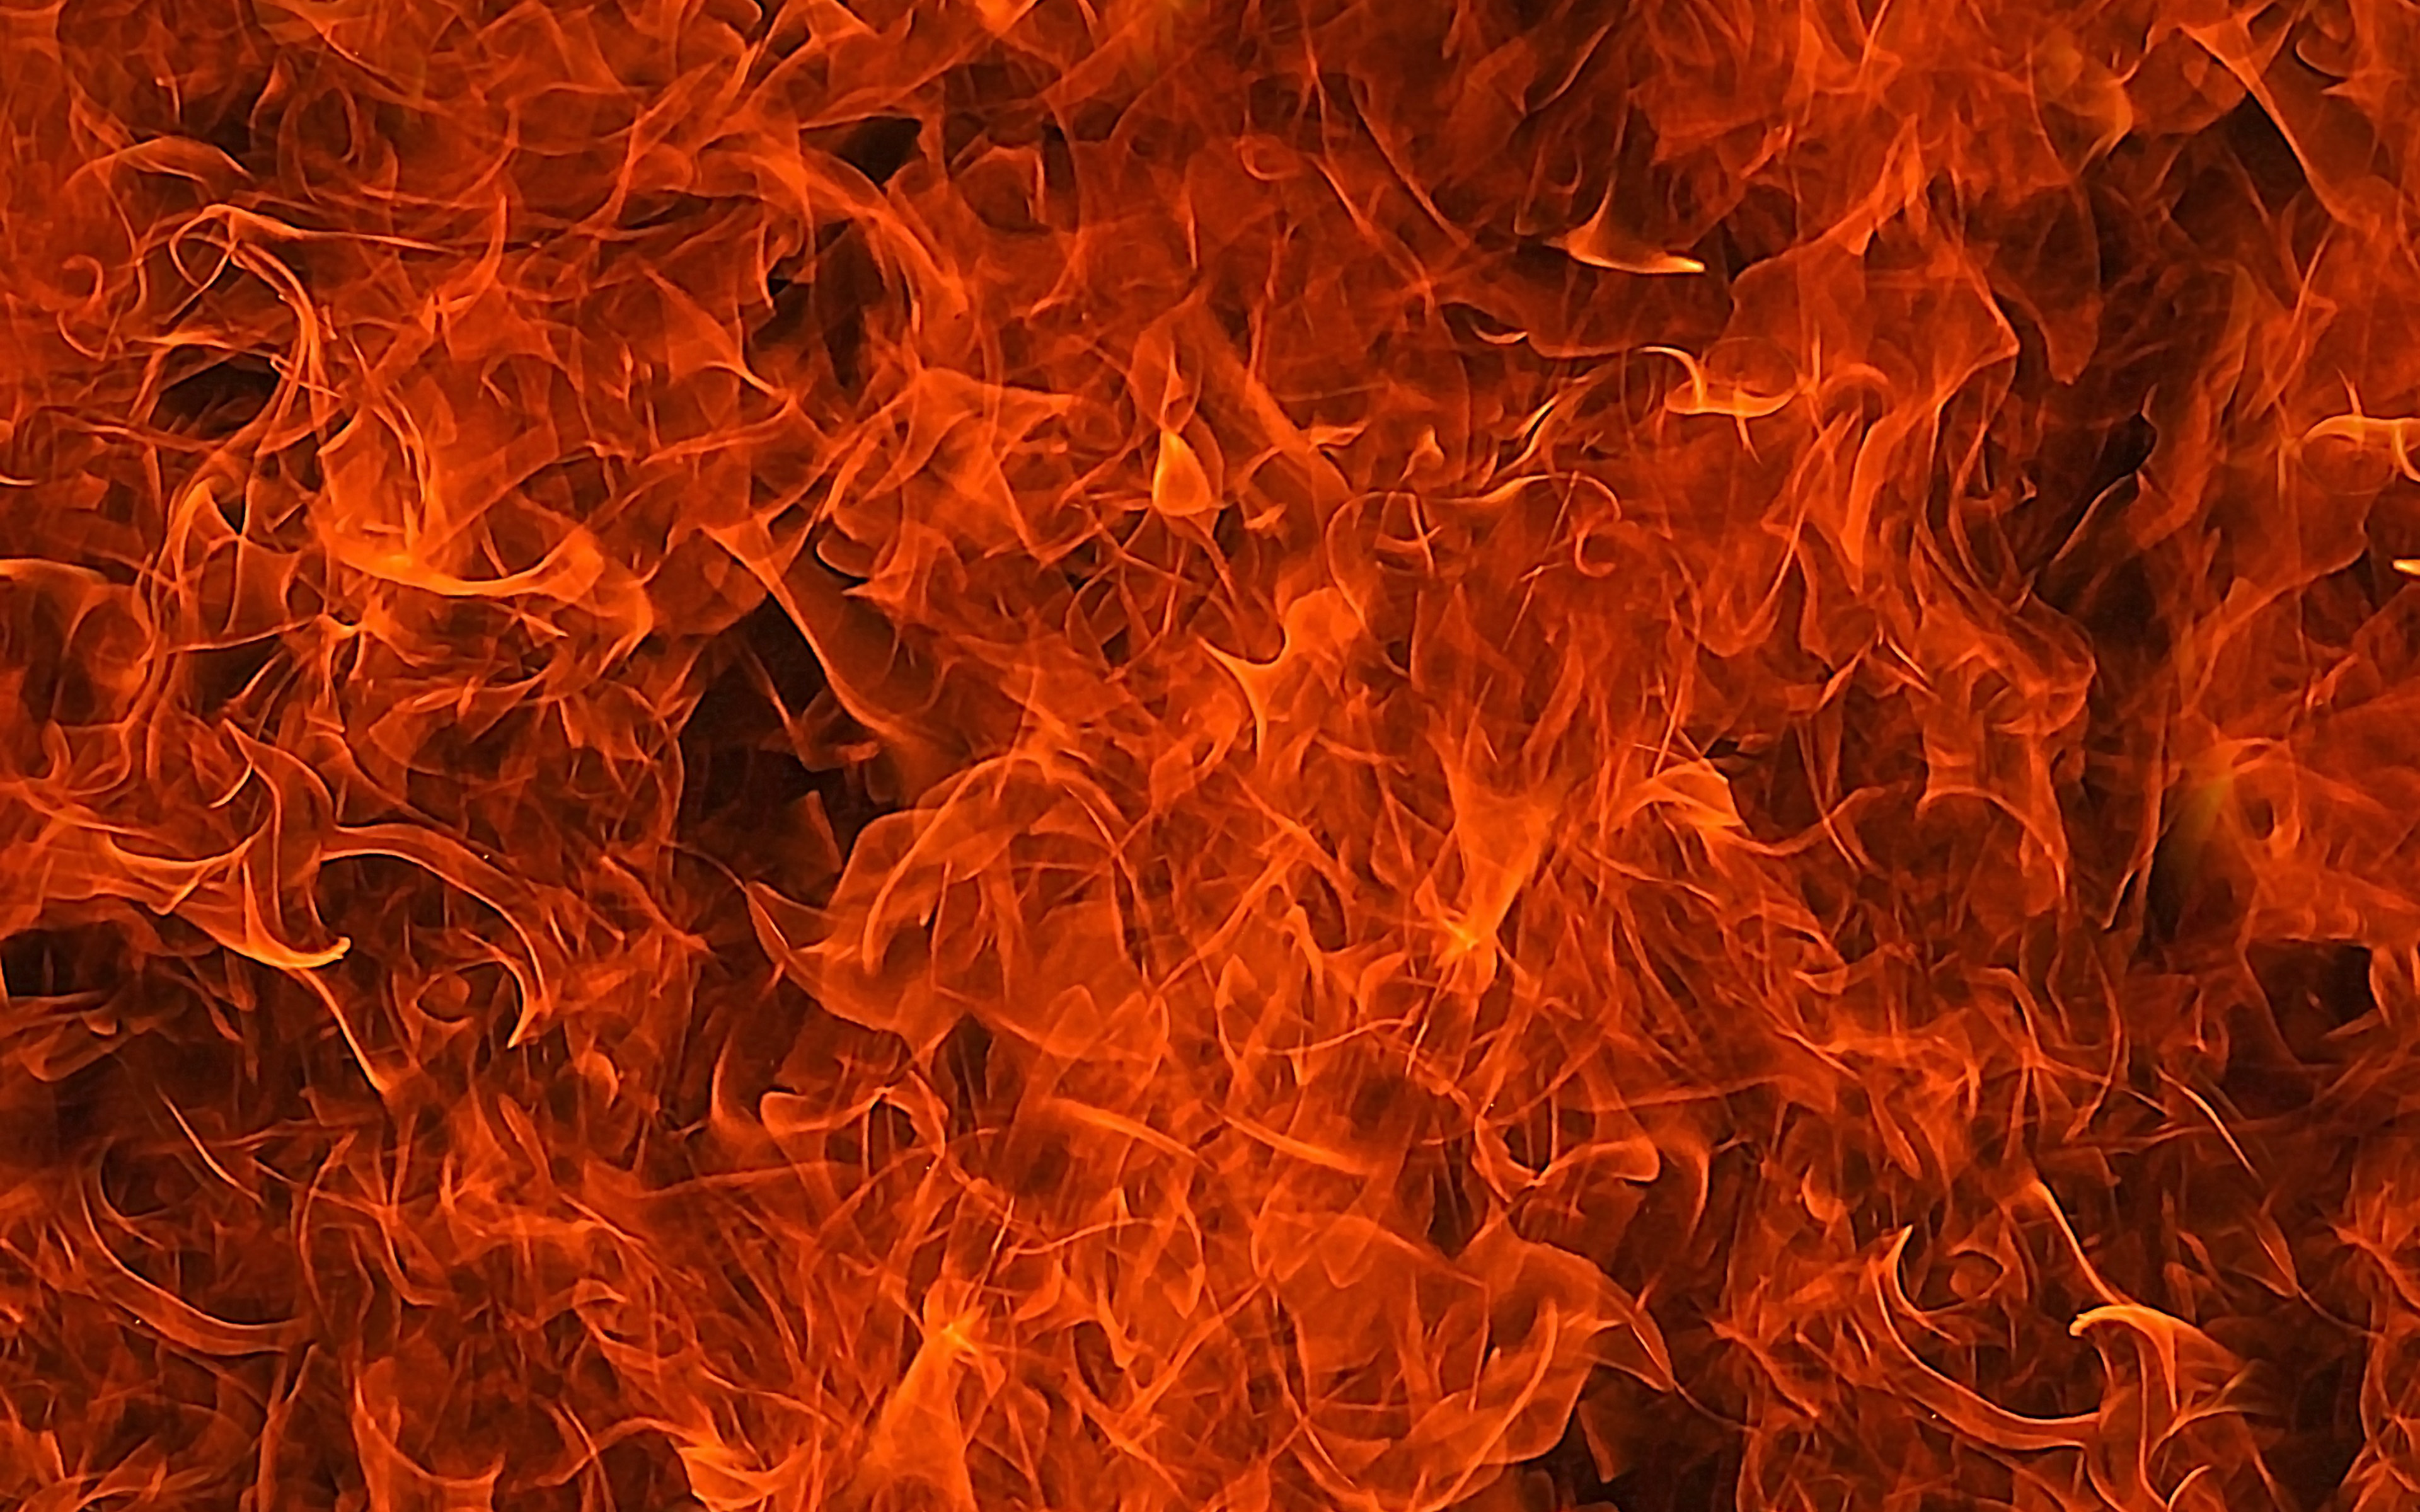 Download wallpaper fire textures, 4k, fireplace, bonfire, fire flames, orange fire texture, fire background for desktop with resolution 3840x2400. High Quality HD picture wallpaper